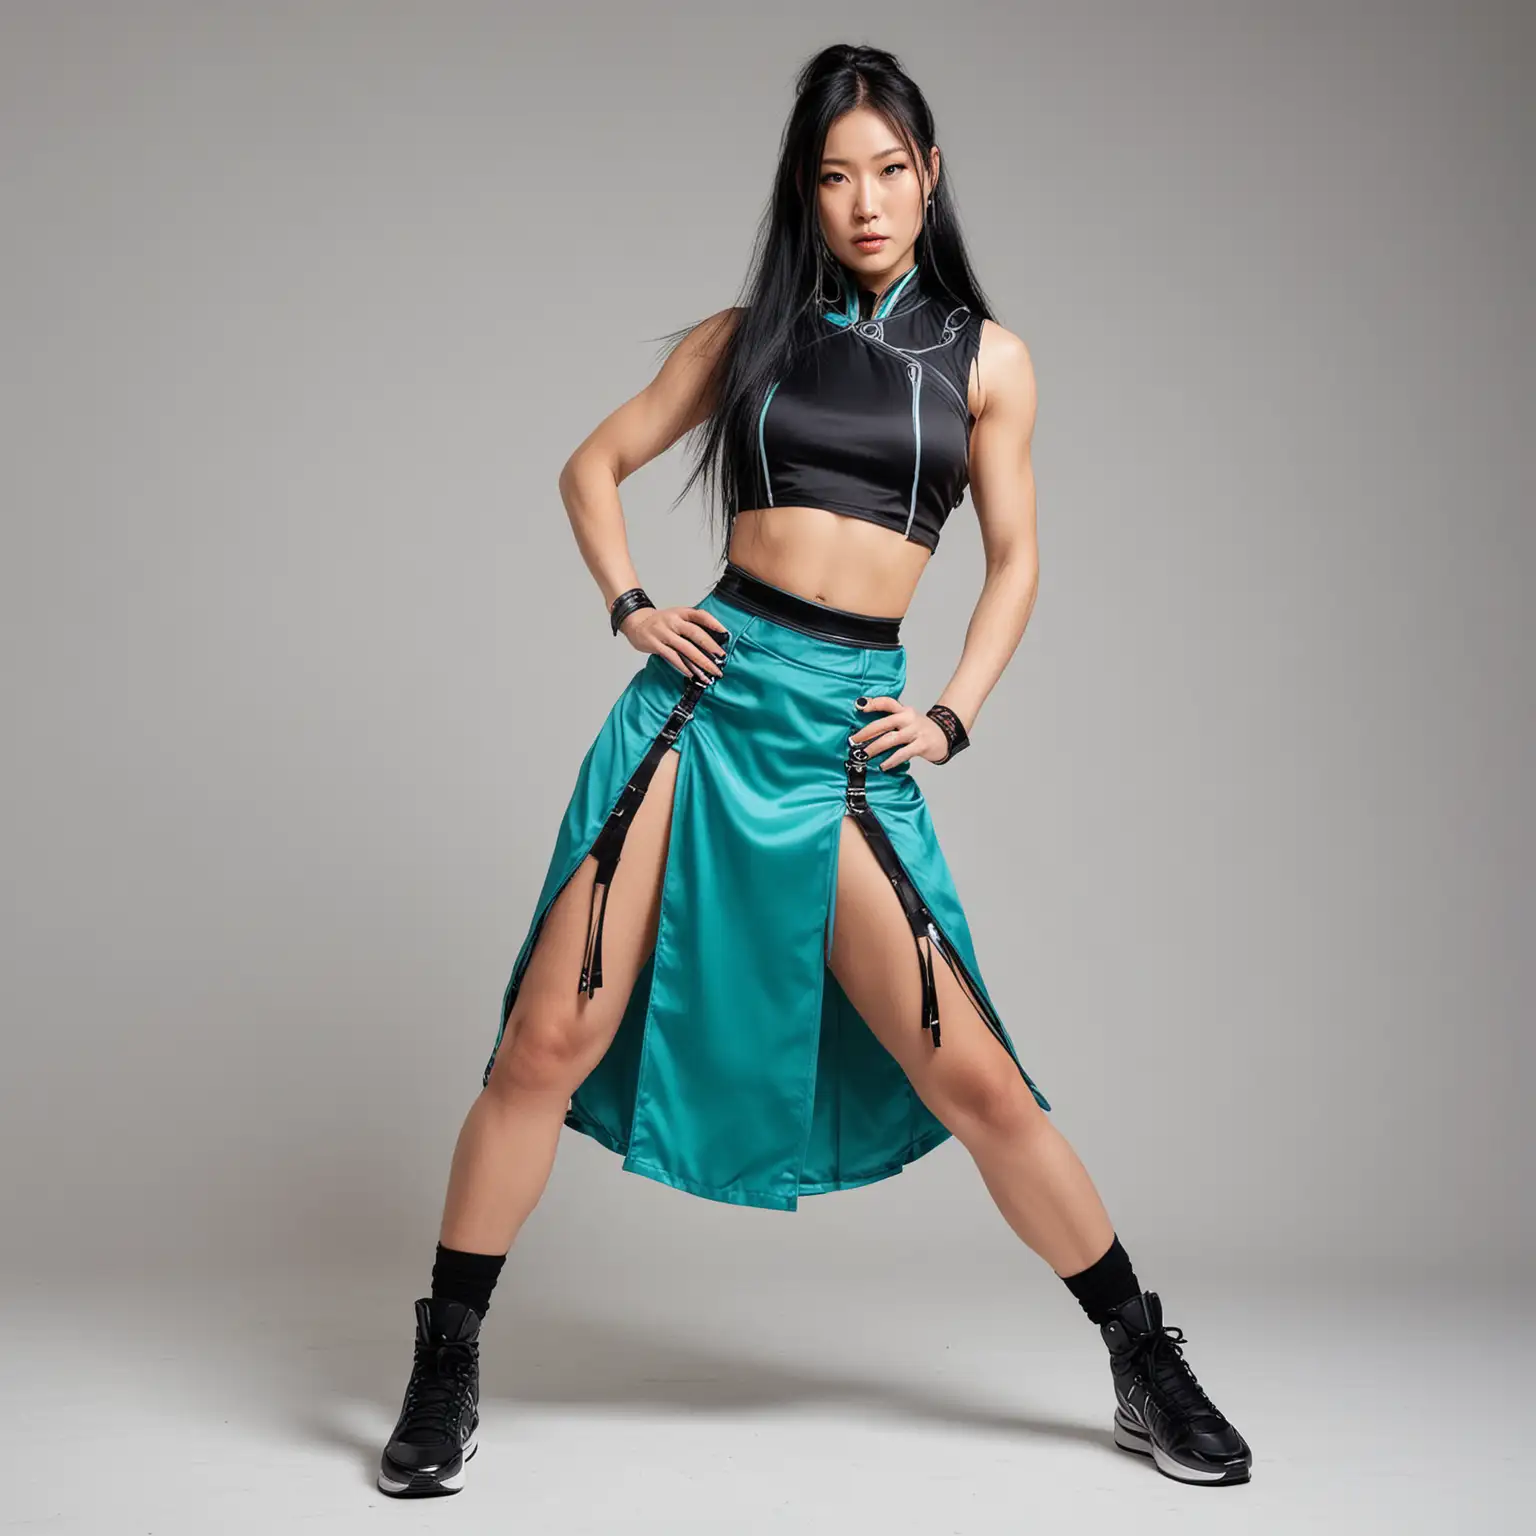 Stunning Japanese Woman in Teal ChunLi Dress and Sneakers on White Background